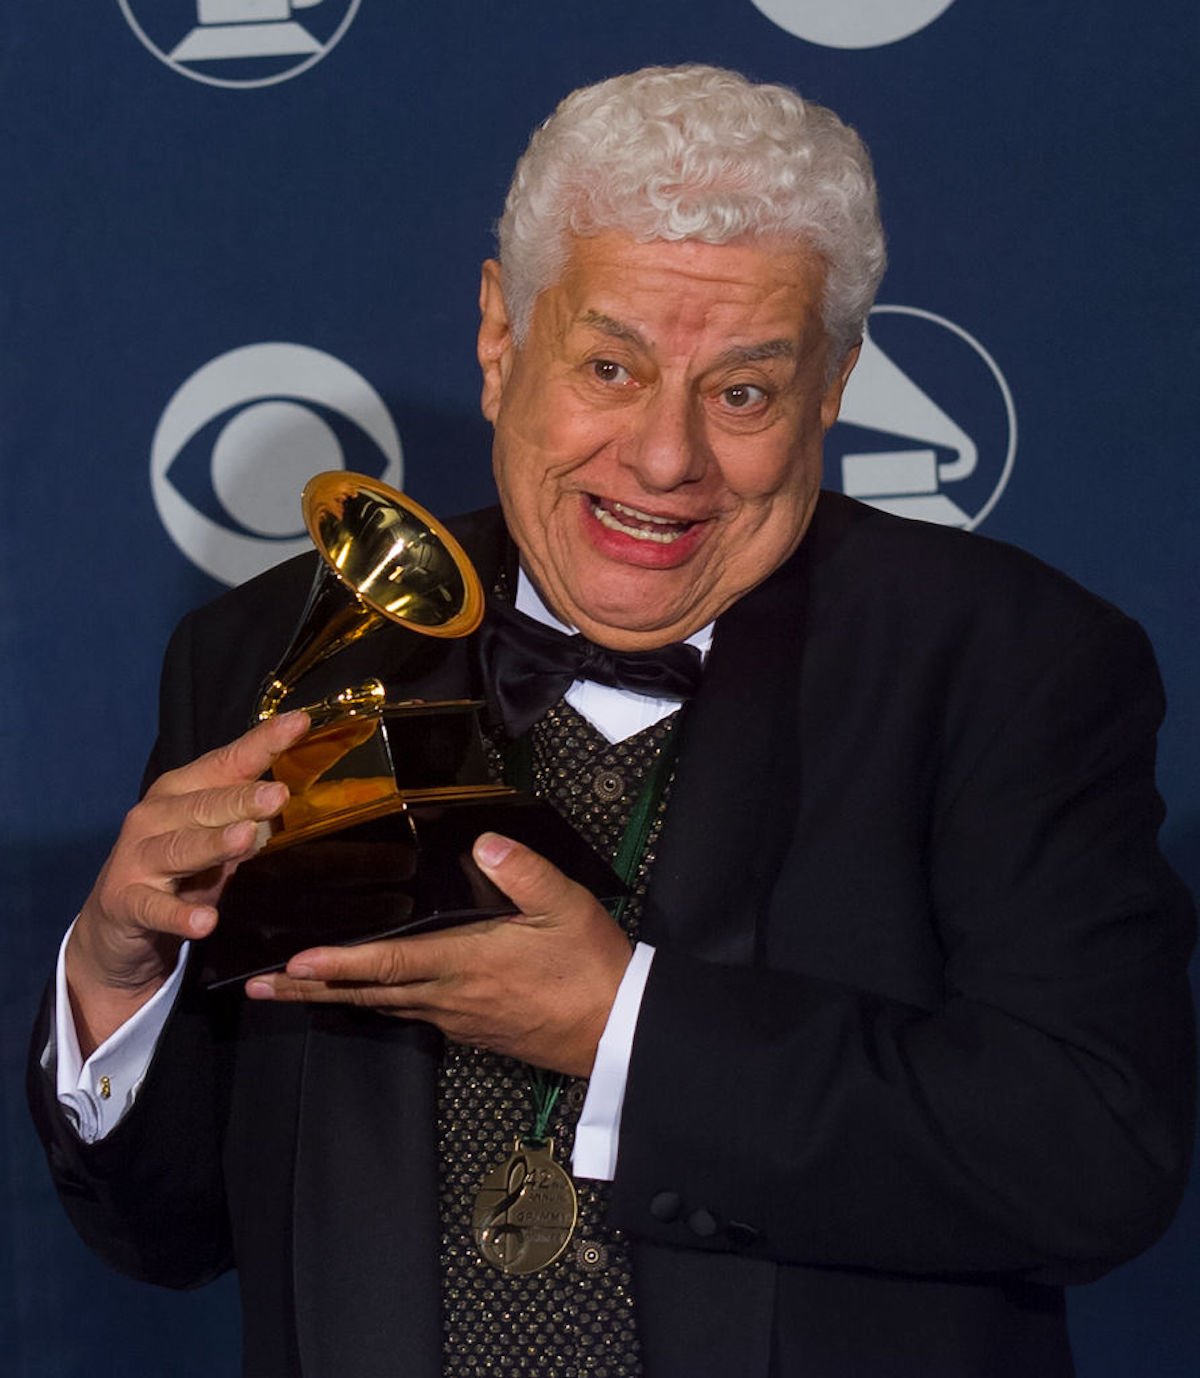 Tito Puente at 2000 Grammy Awards